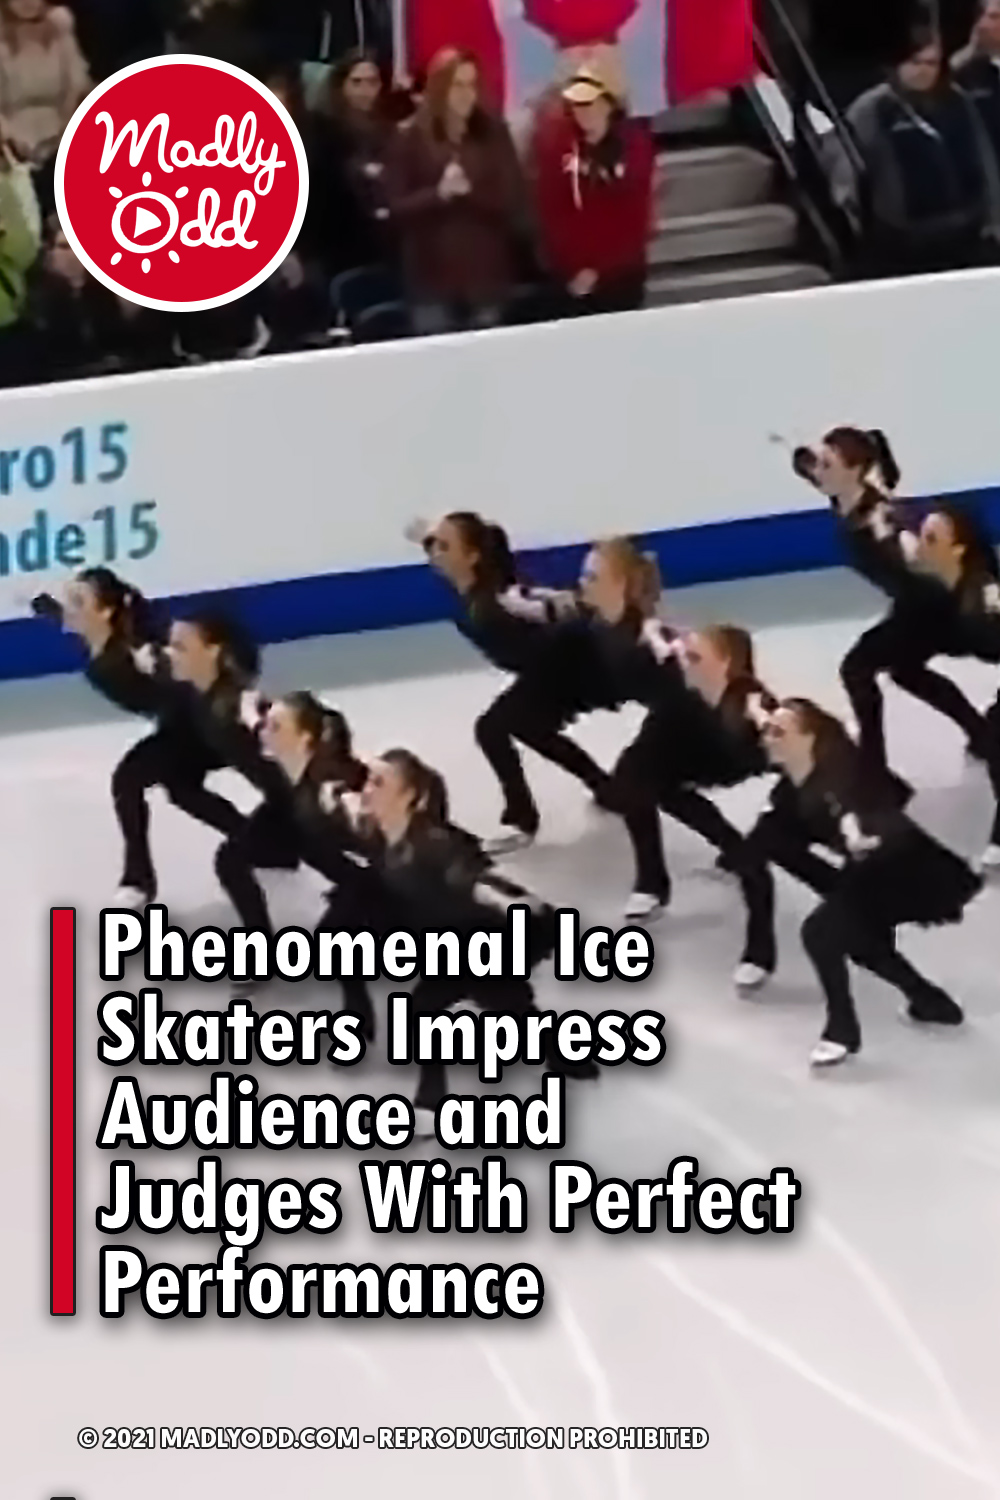 Phenomenal Ice Skaters Impress Audience and Judges With Perfect Performance